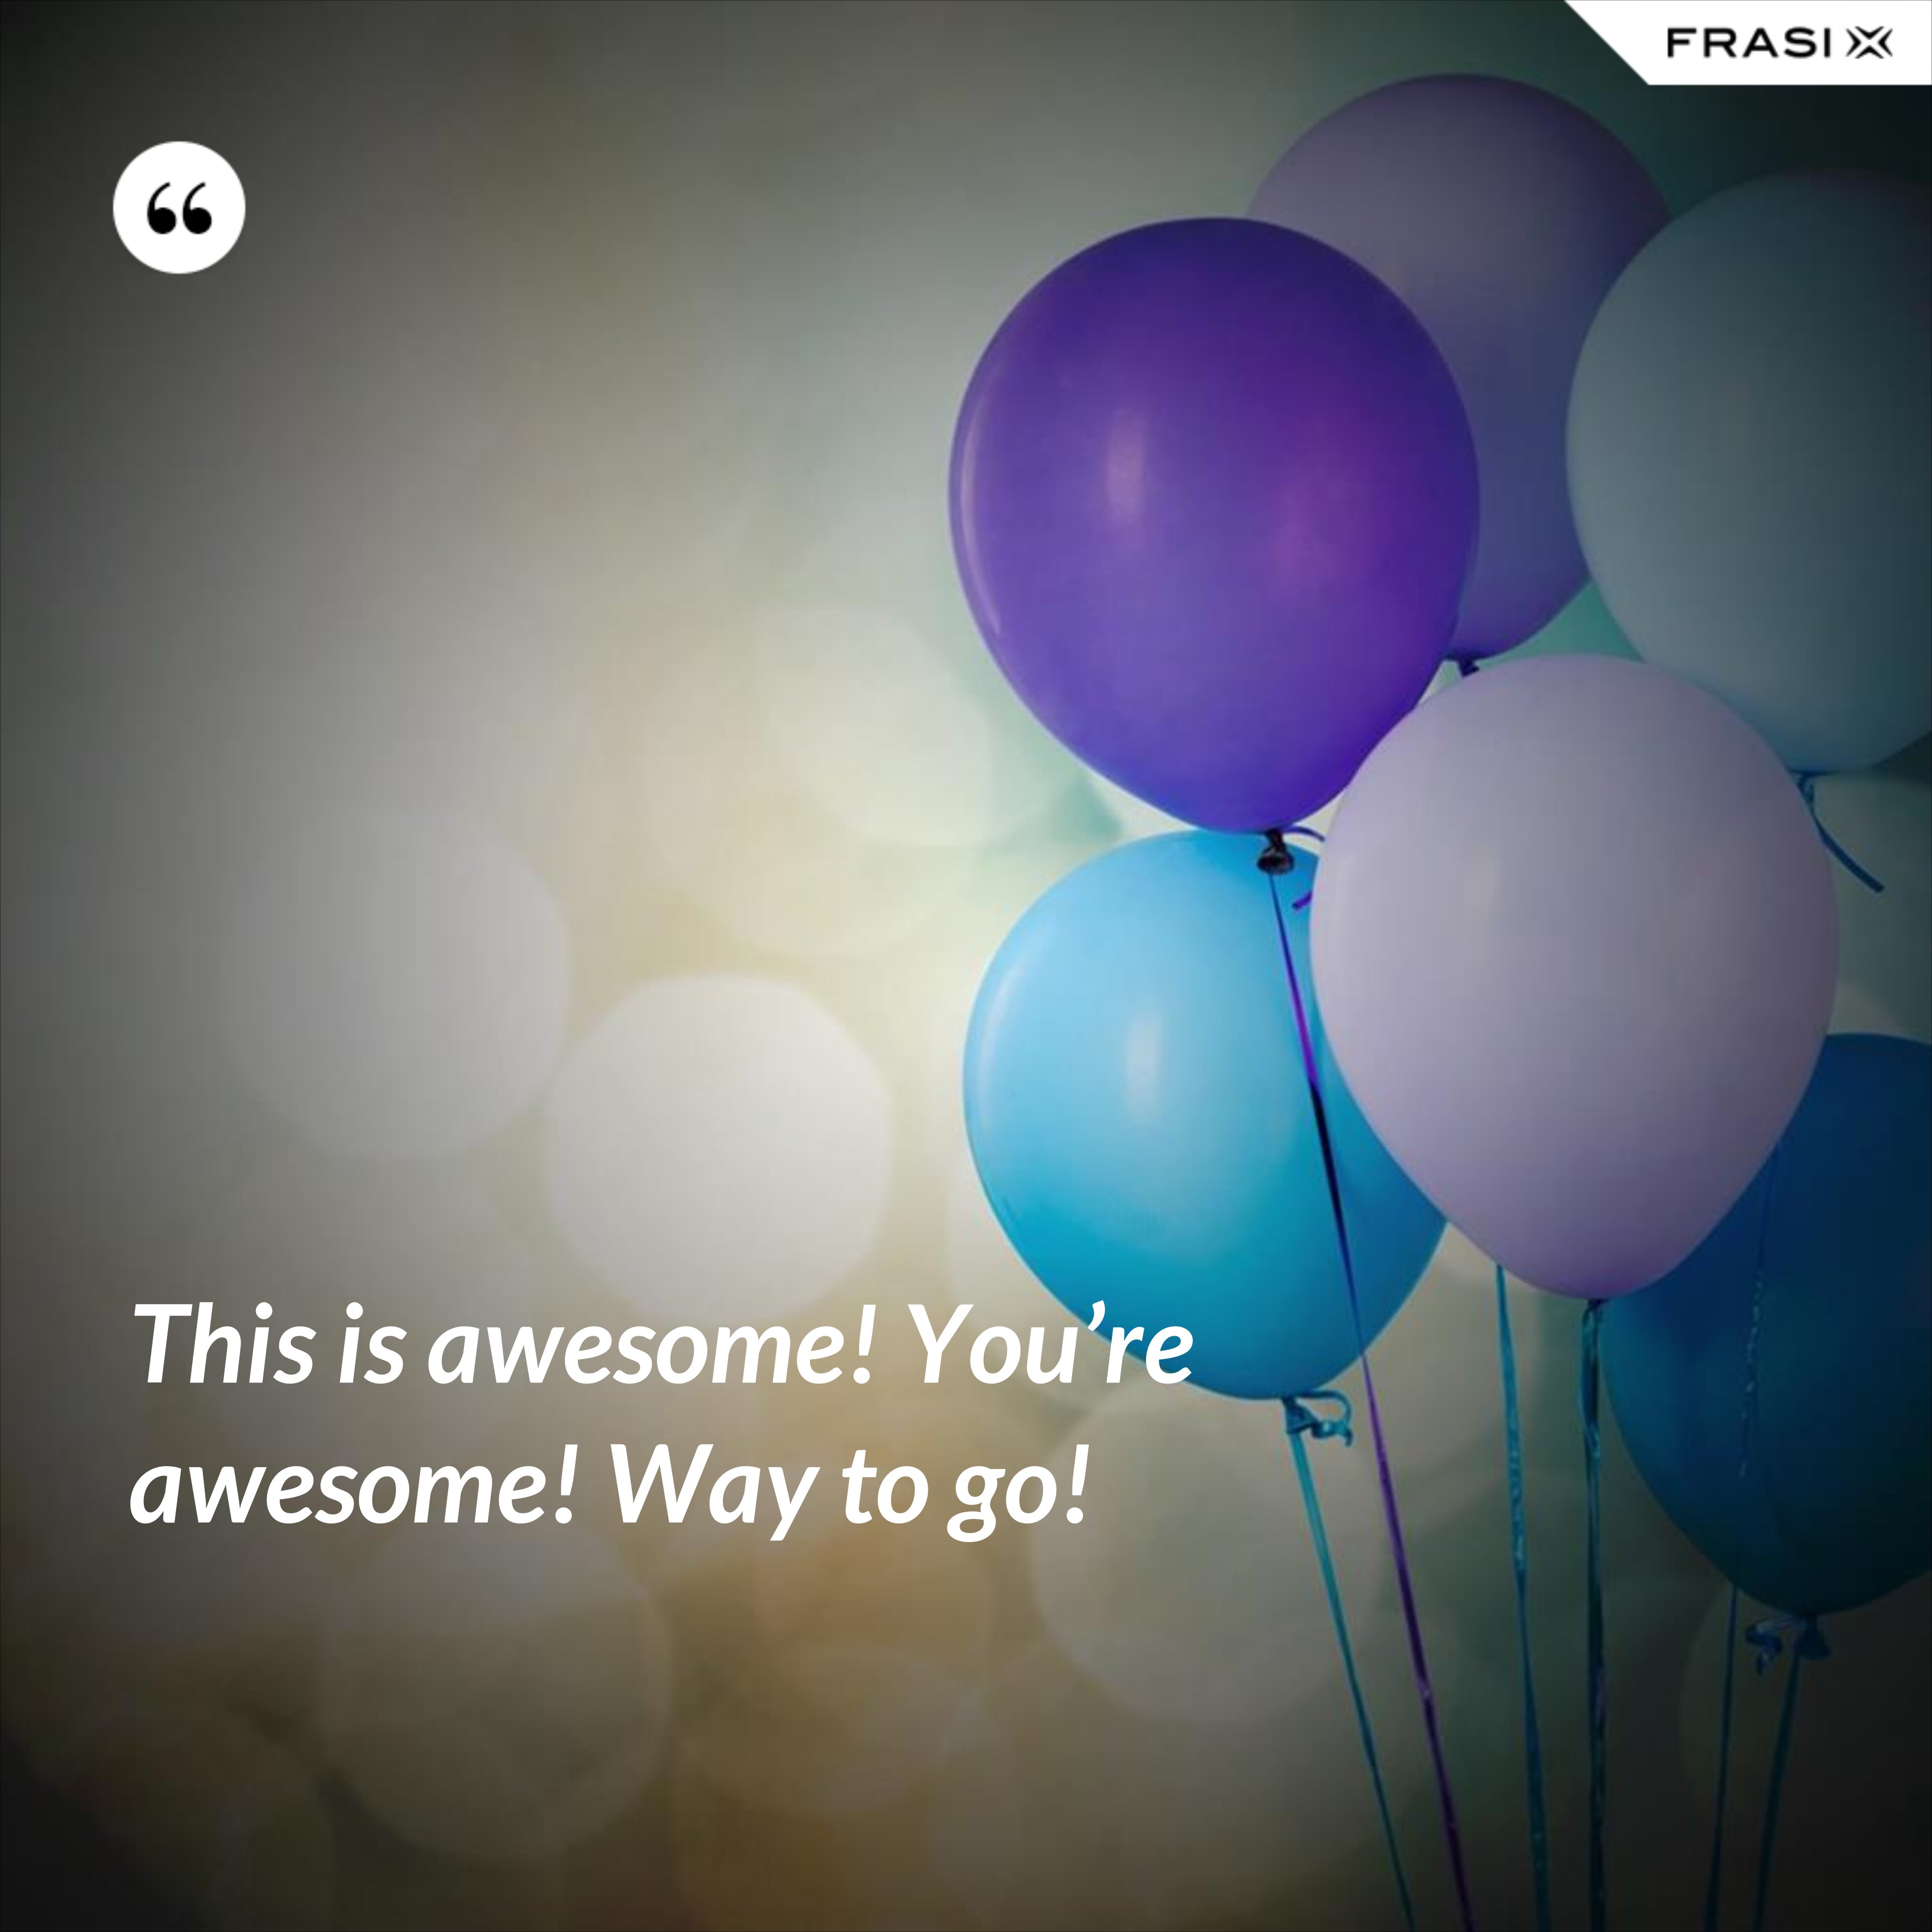 This is awesome! You’re awesome! Way to go! - Anonimo